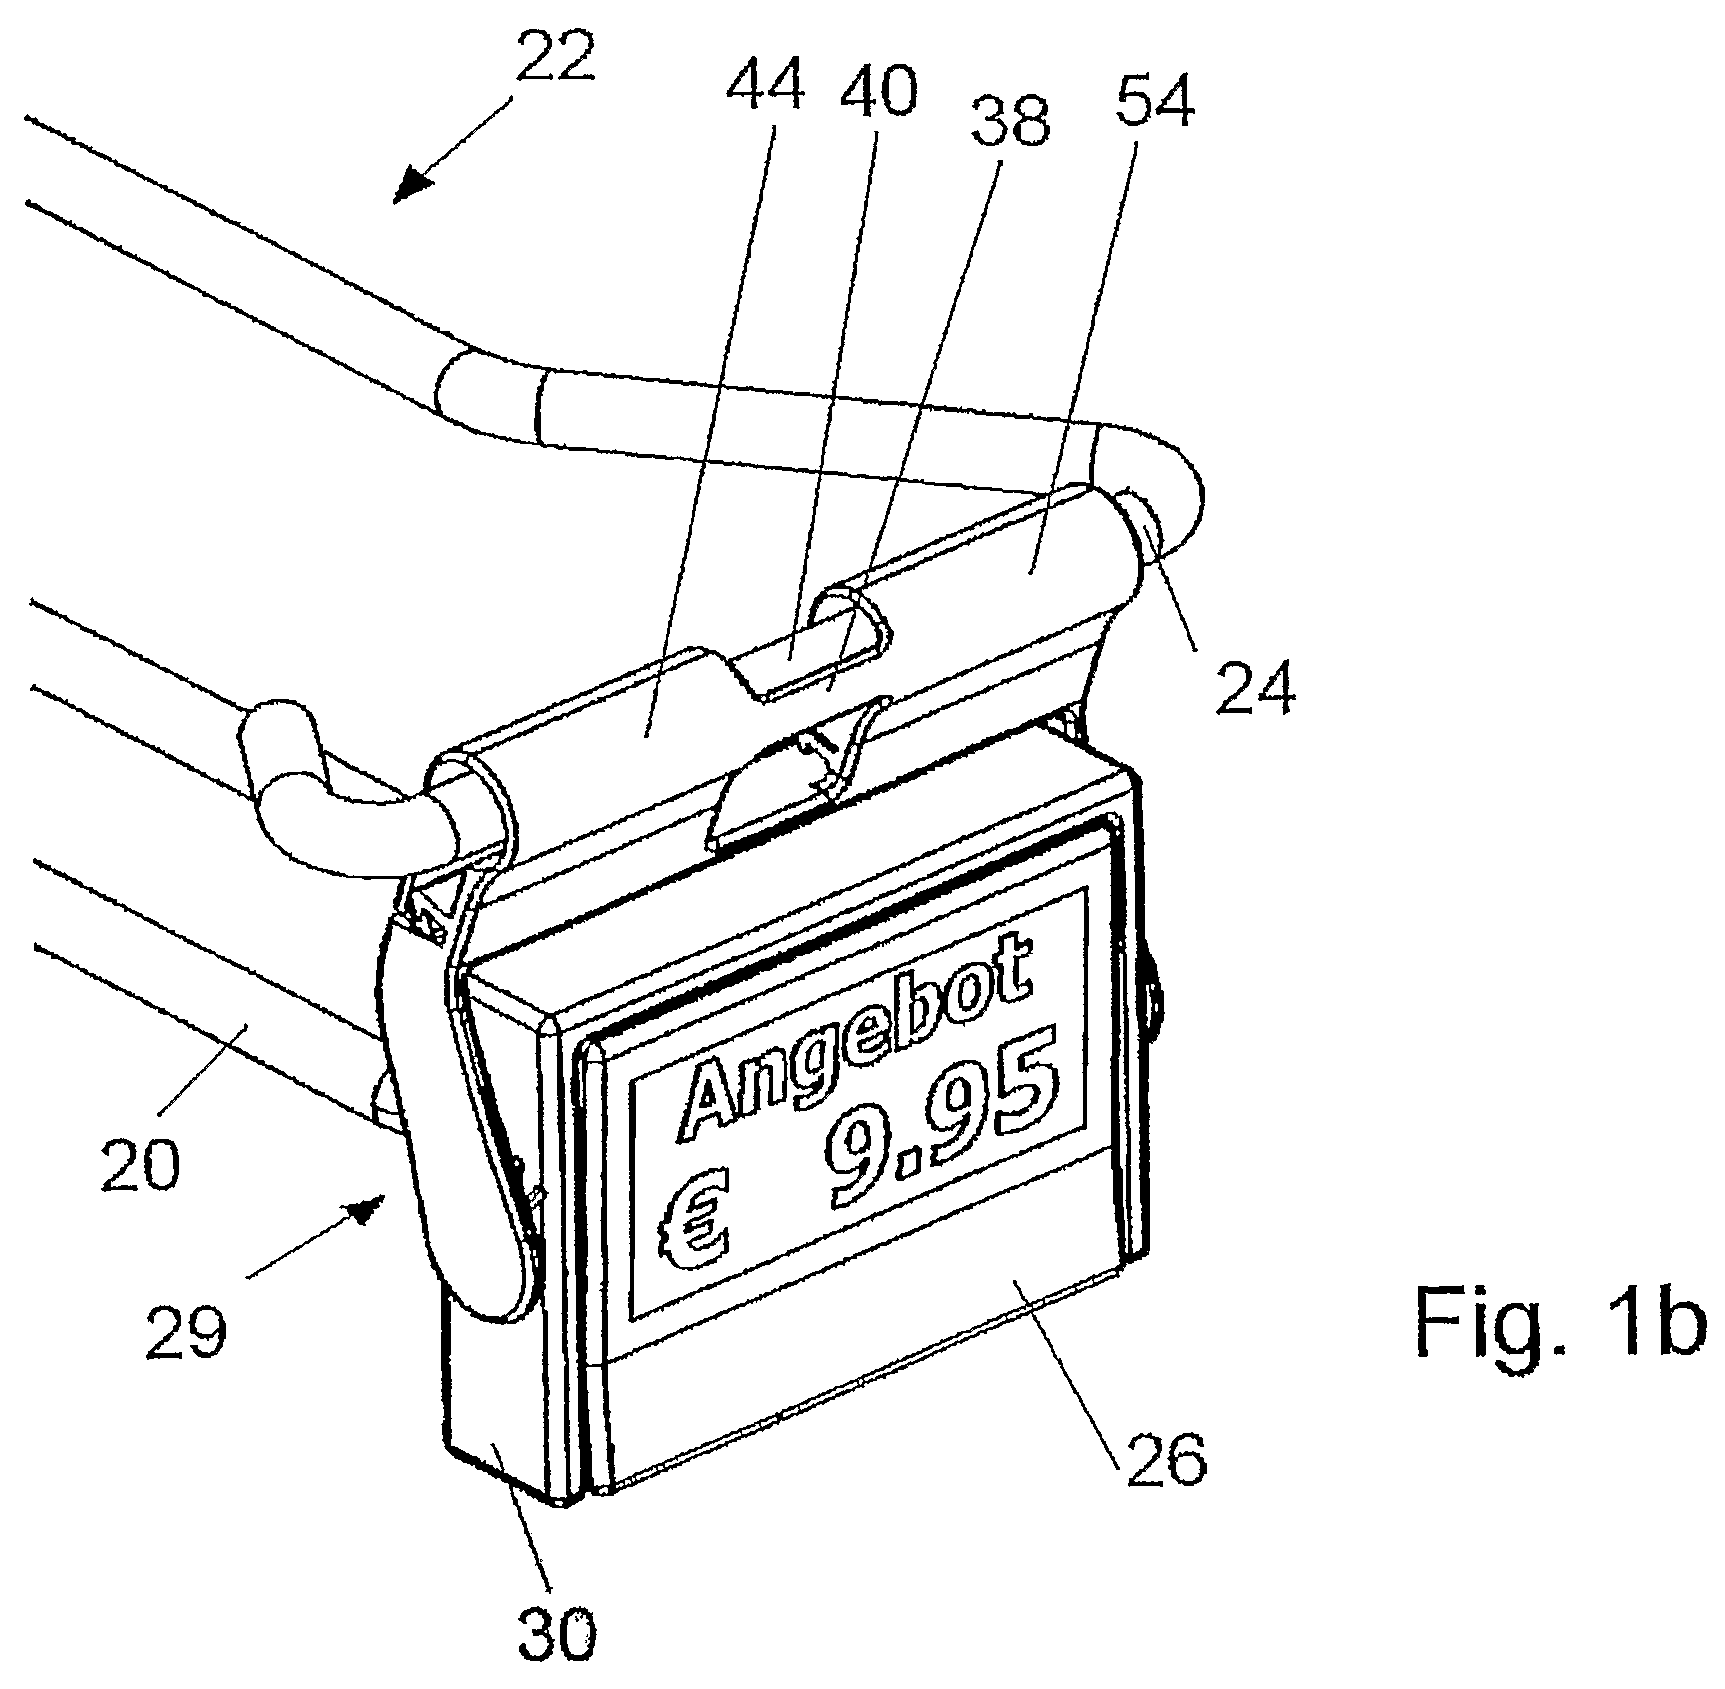 Adapter for attaching an electronic shelf label to a blister hook